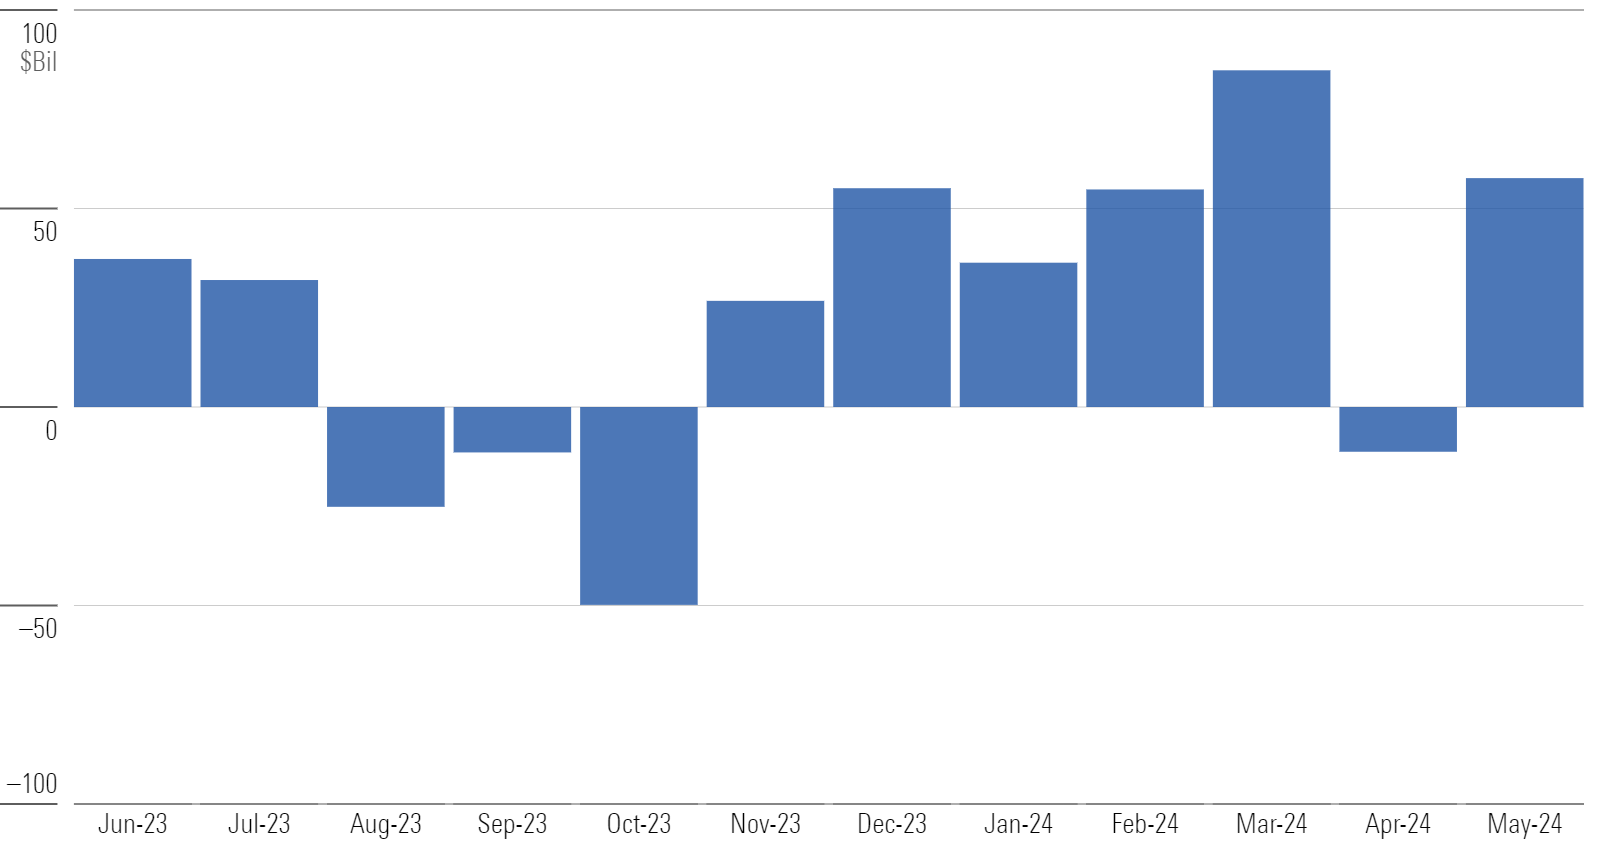 Bar chart of monthly flows for US funds.